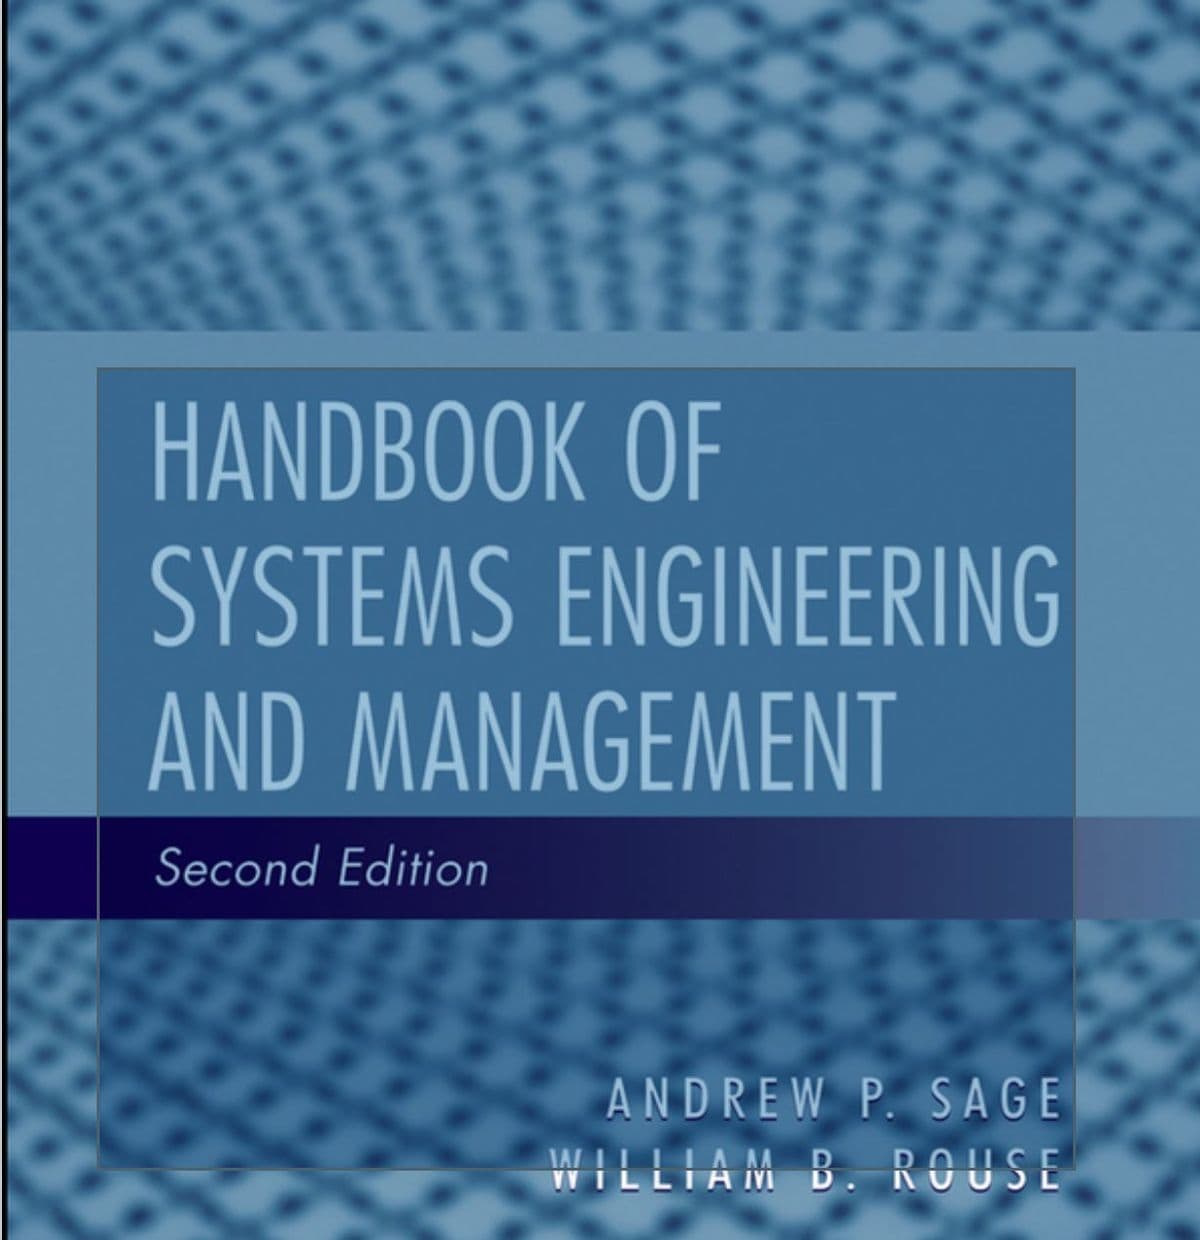 HANDBOOK OF
SYSTEMS ENGINEERING
AND MANAGEMENT
Second Edition
ANDREW P. SAGE
WILLIAM B. ROUSE
